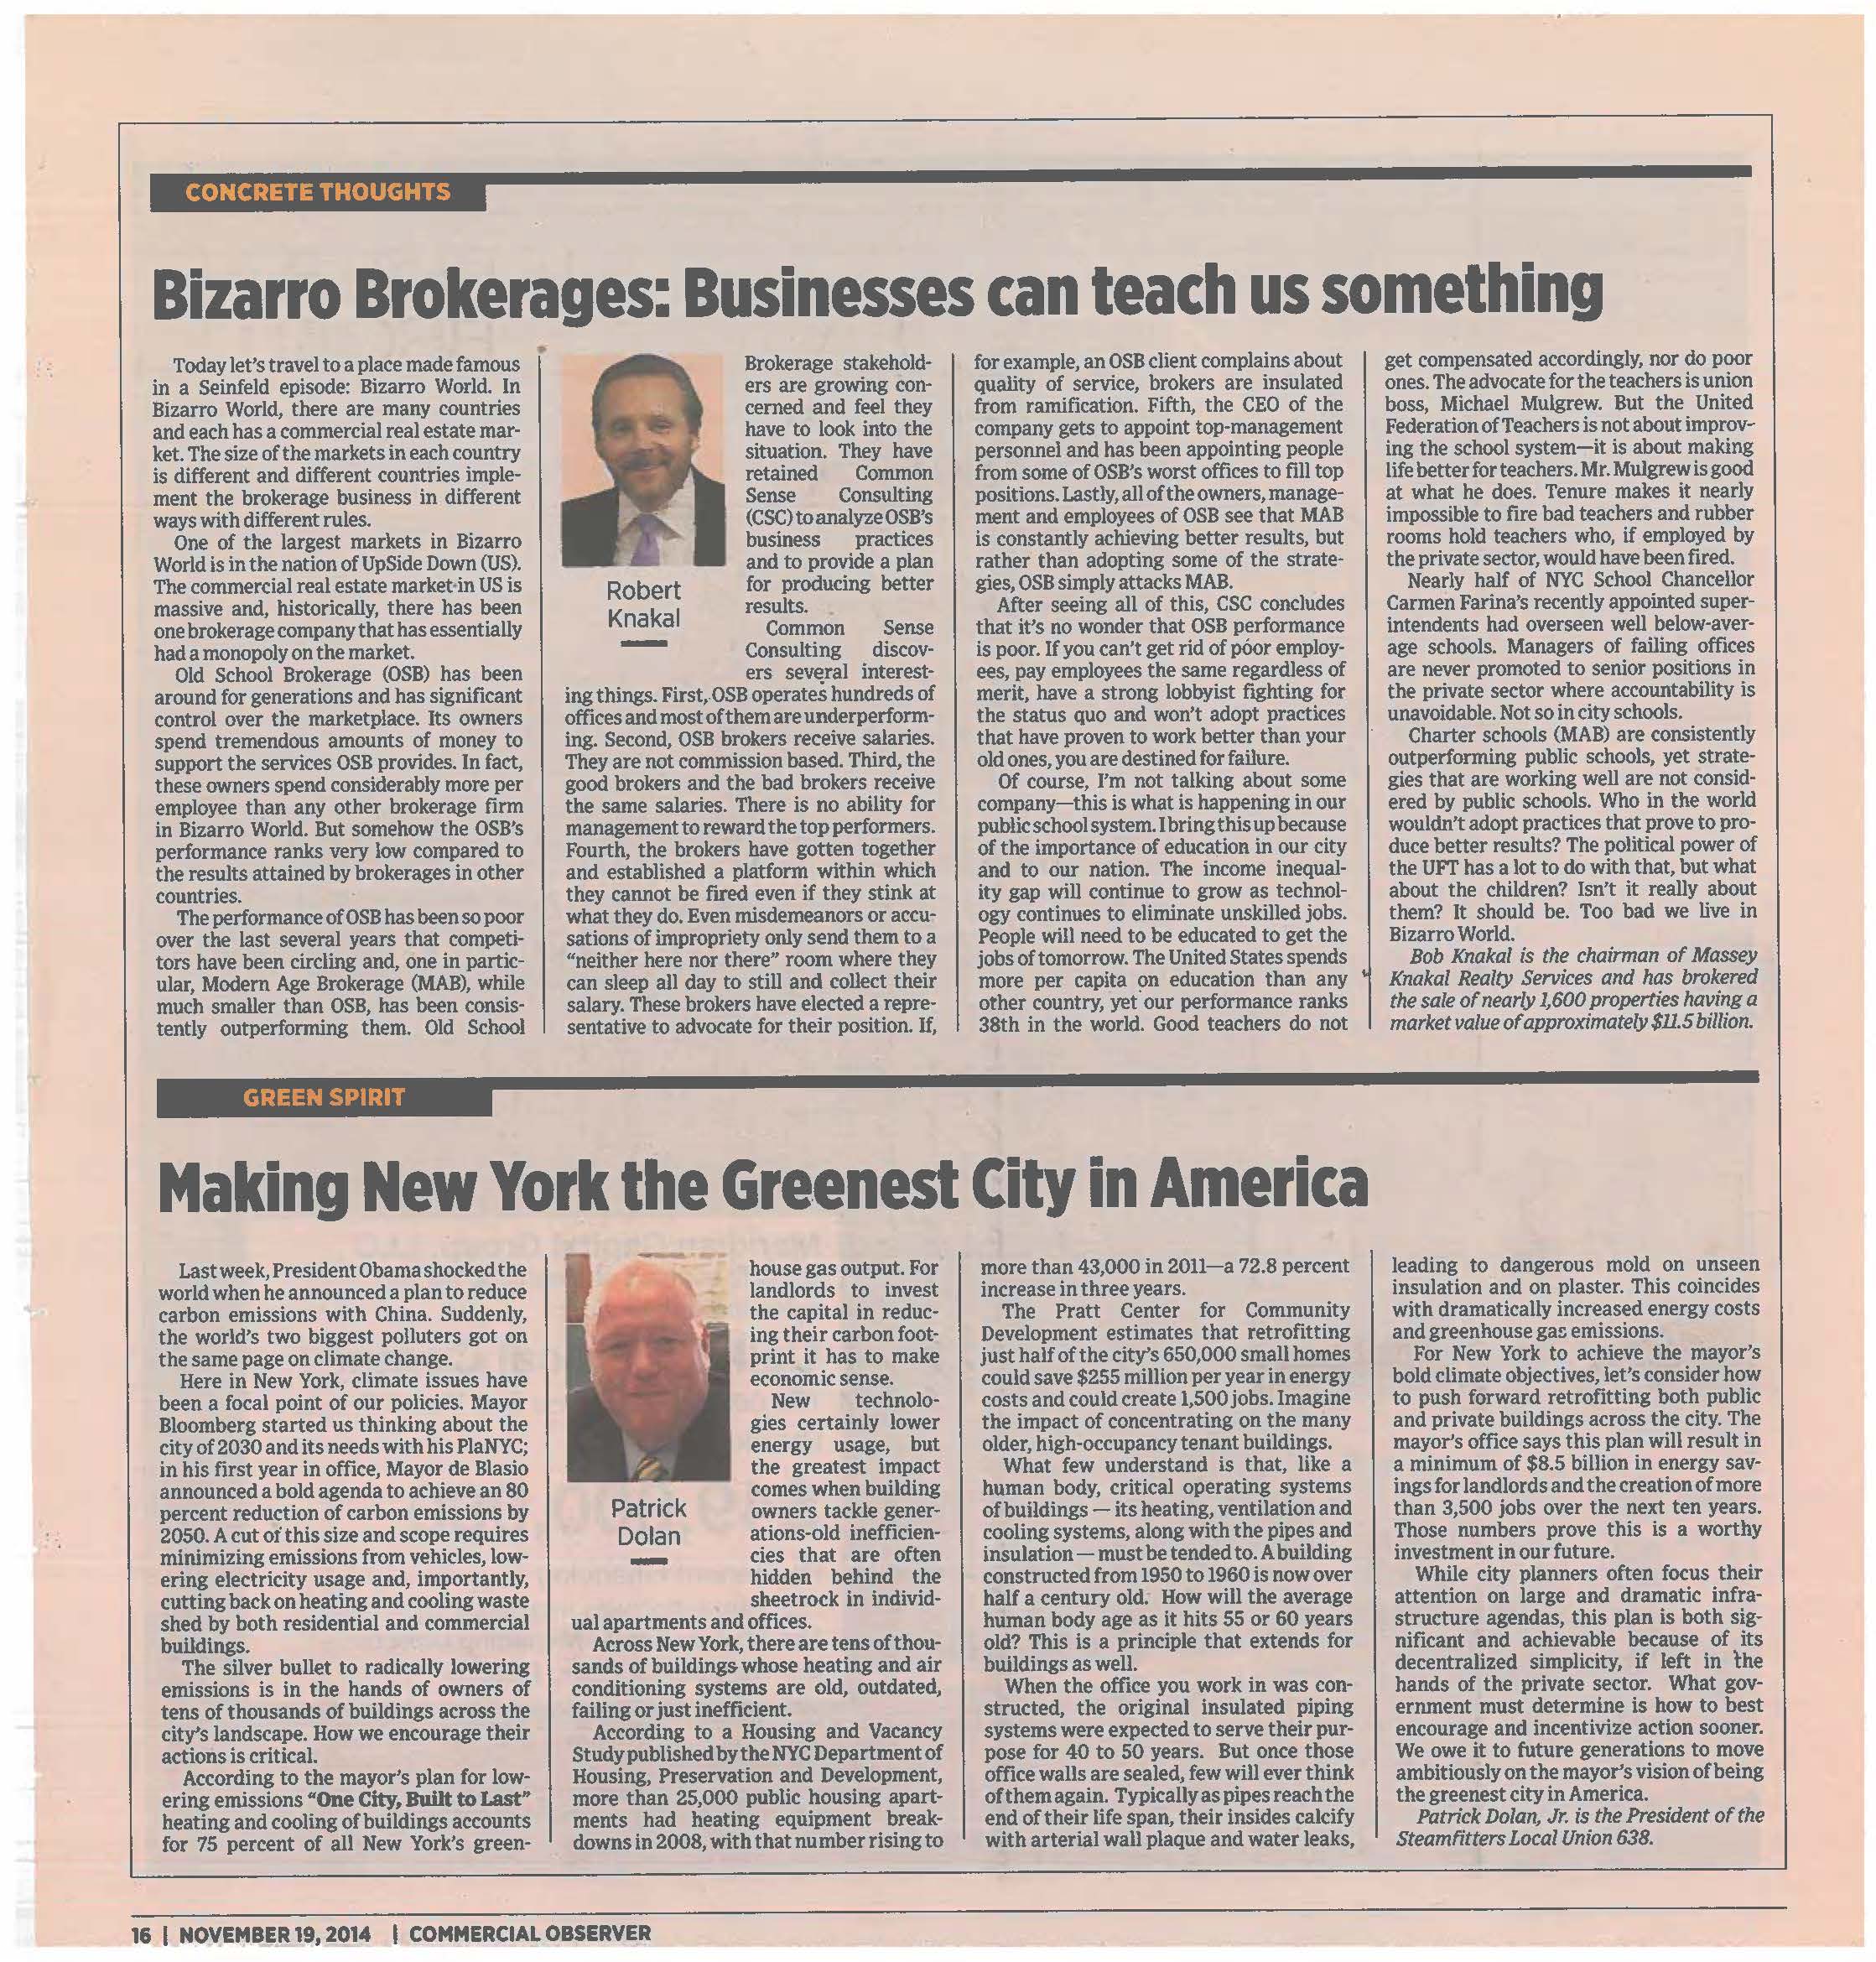 Concrete Thoughts - Bizarro Brokerages Businesses can teach us something - Nov 19 2014